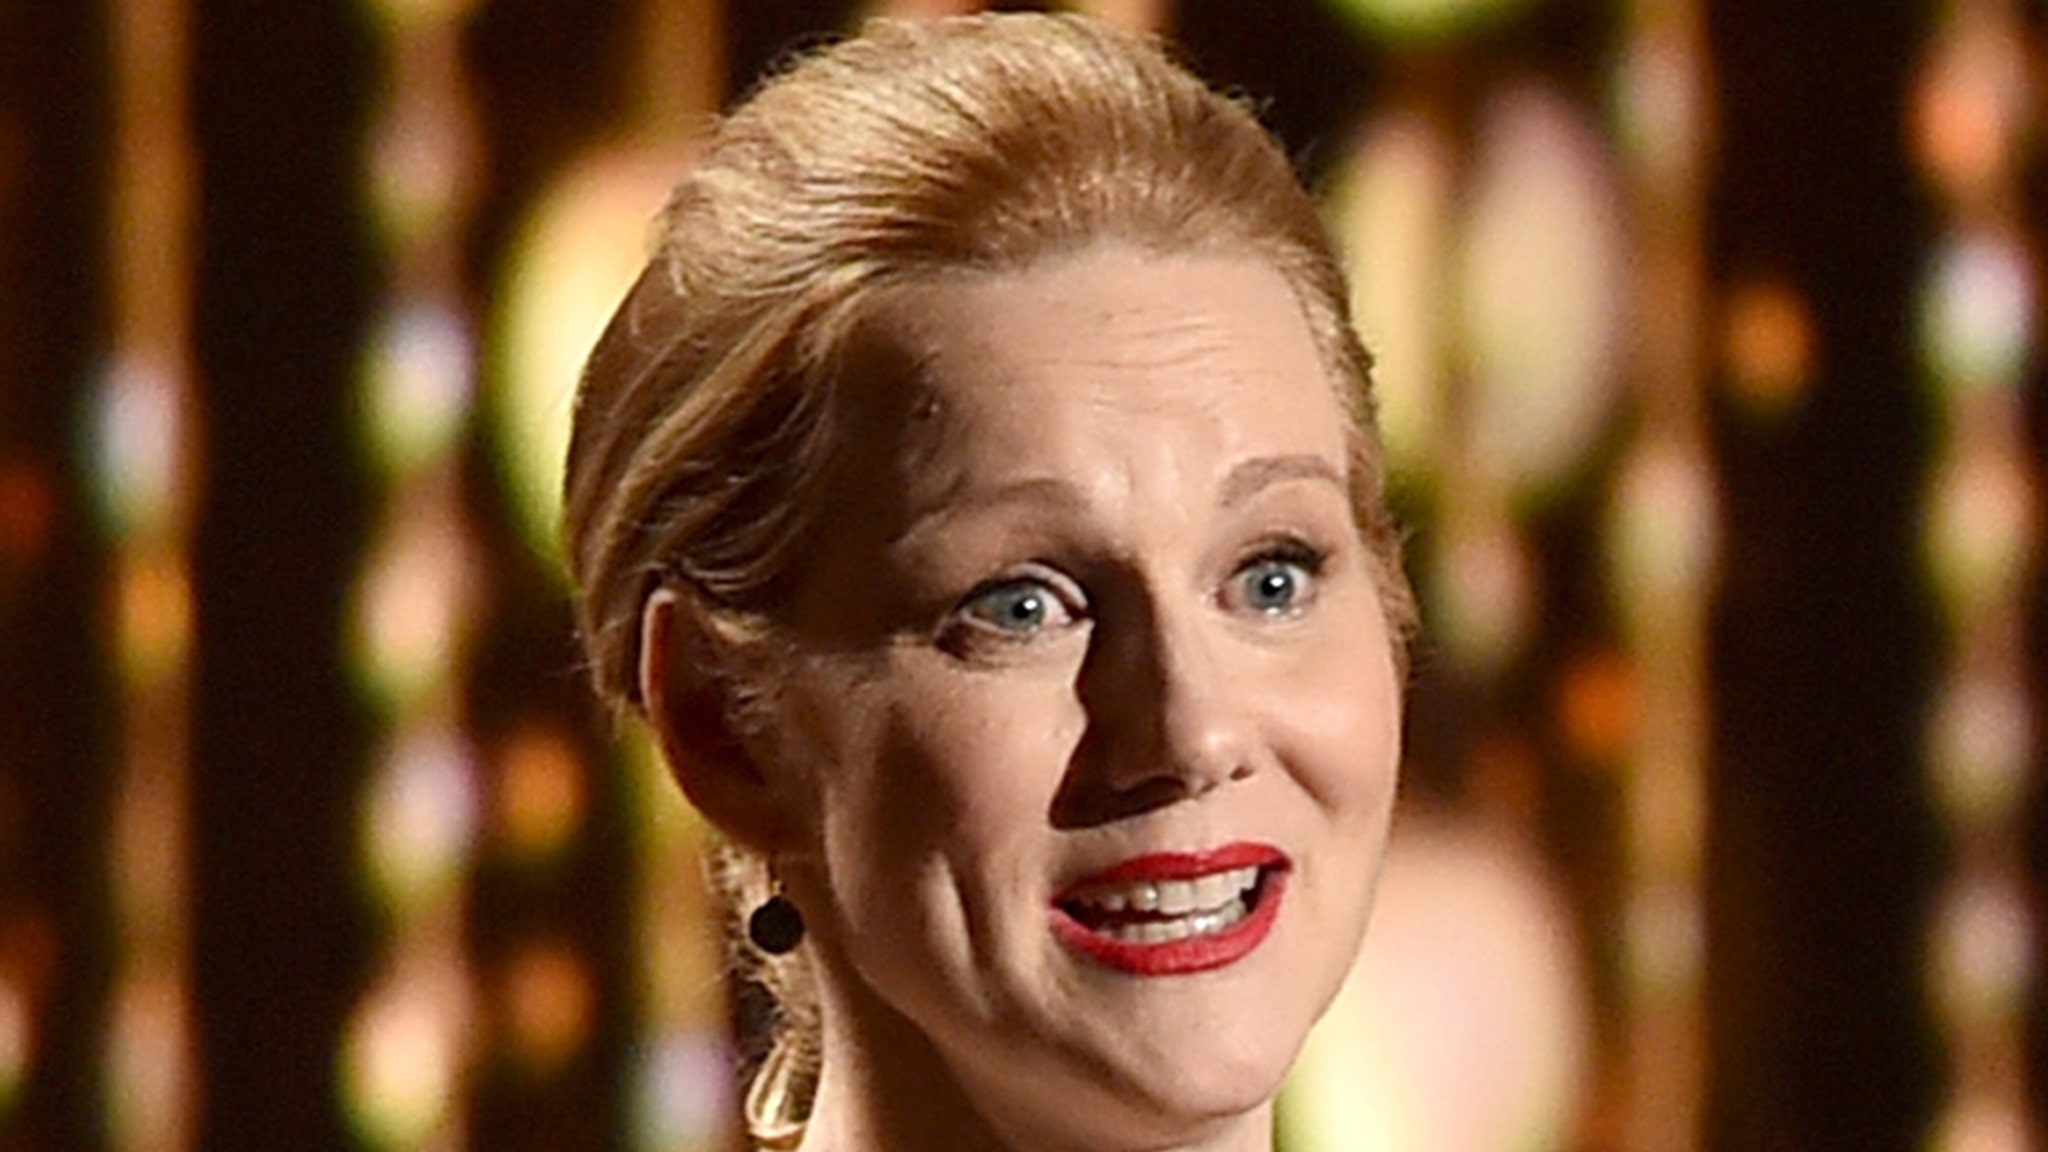 Laura Linney team member attacked by Autograph Hound in New York